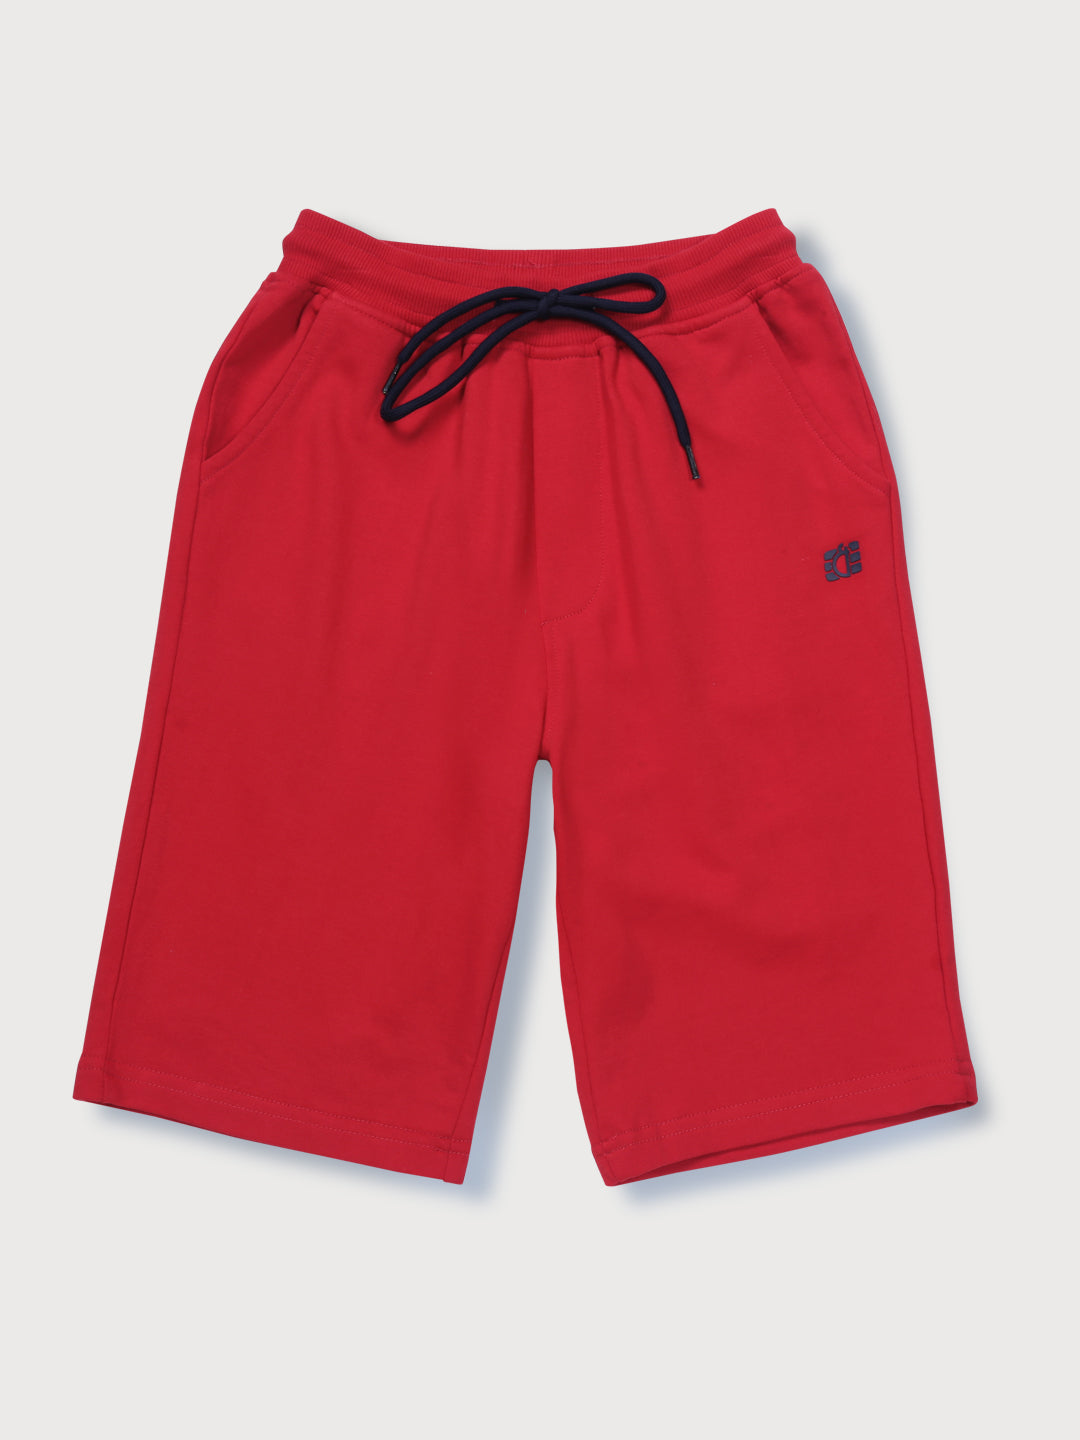 Boys Red Solid Knits Bermuda